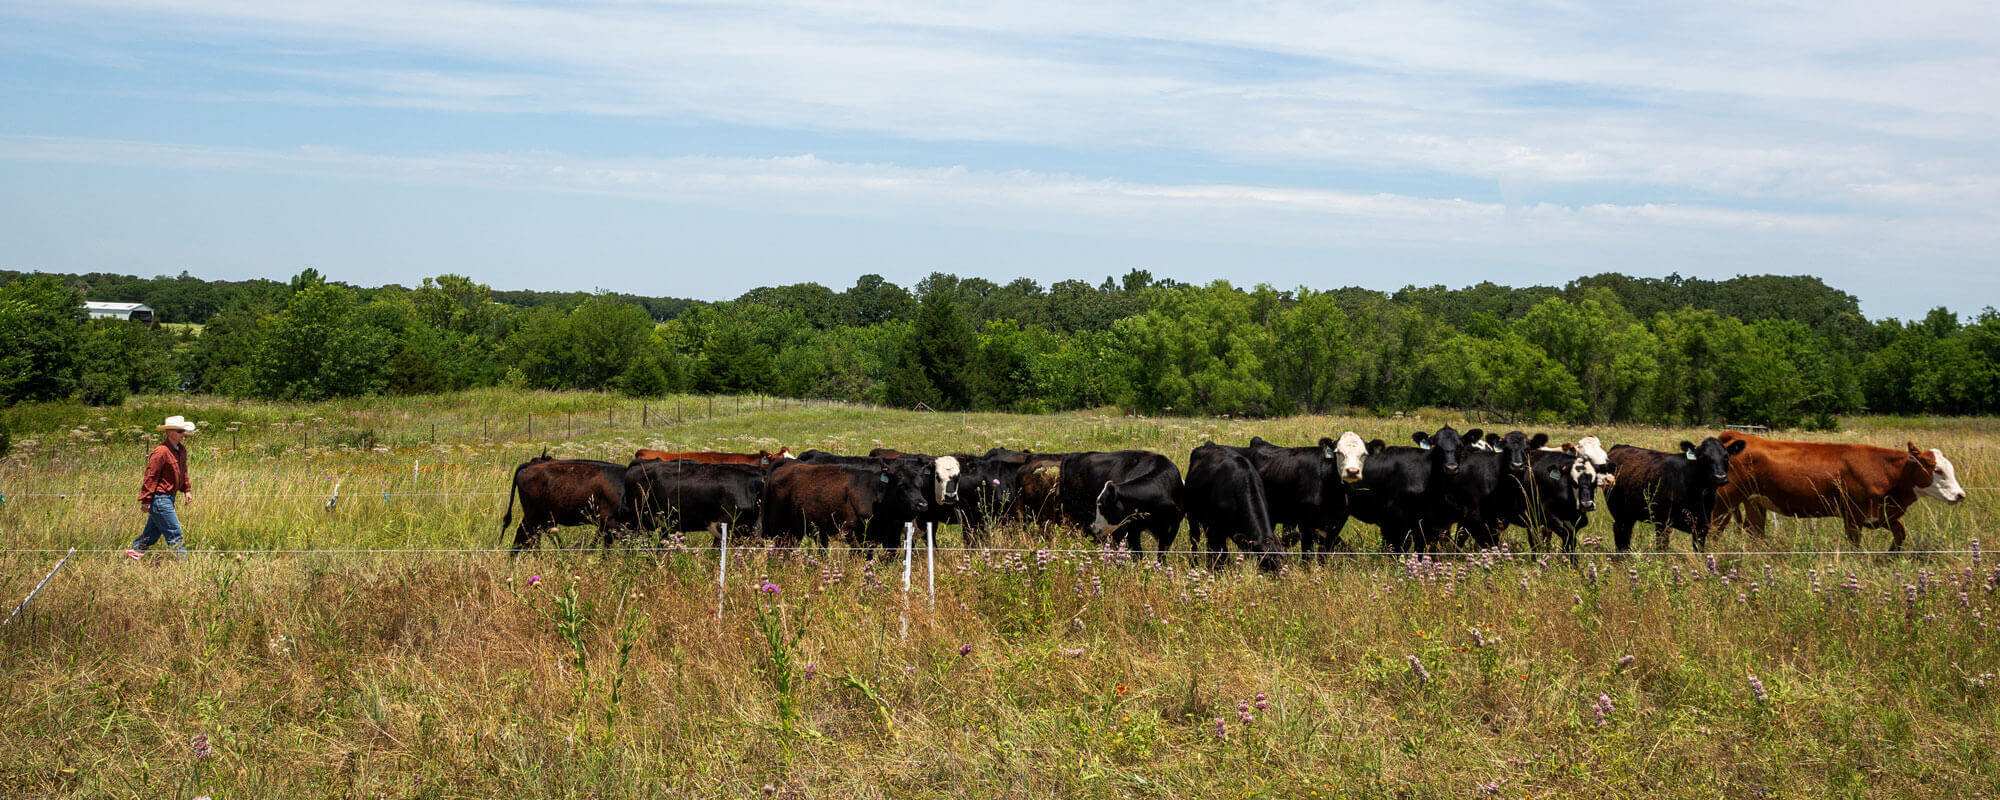 Cattle high-stock density grazing in a polywire fenced paddock